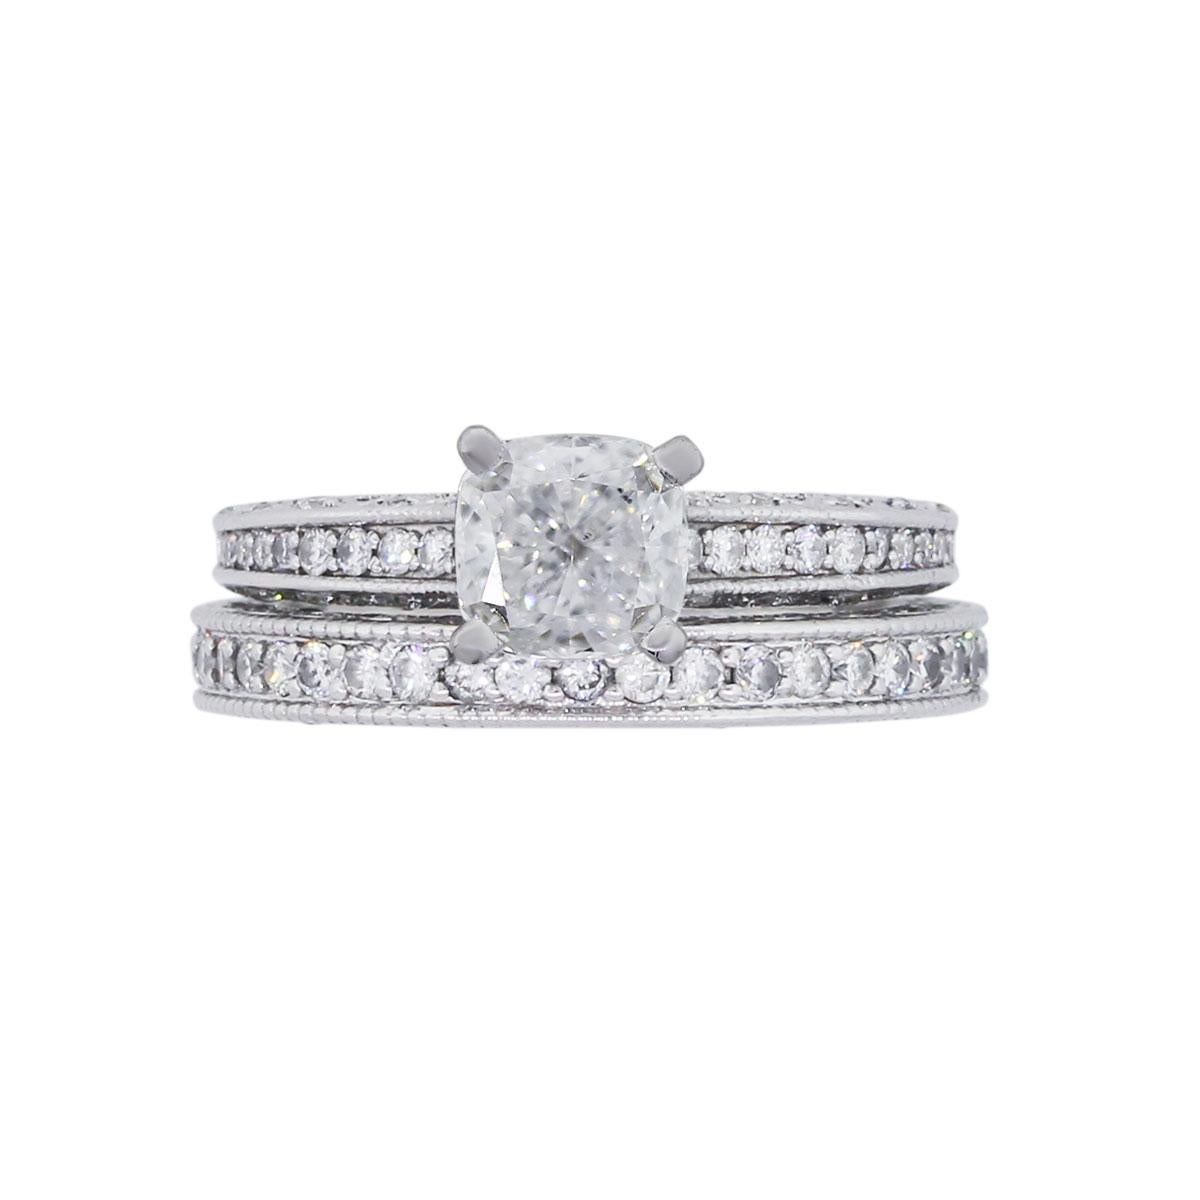 GIA Certified Cushion Cut Diamond Ring and Band Set 2